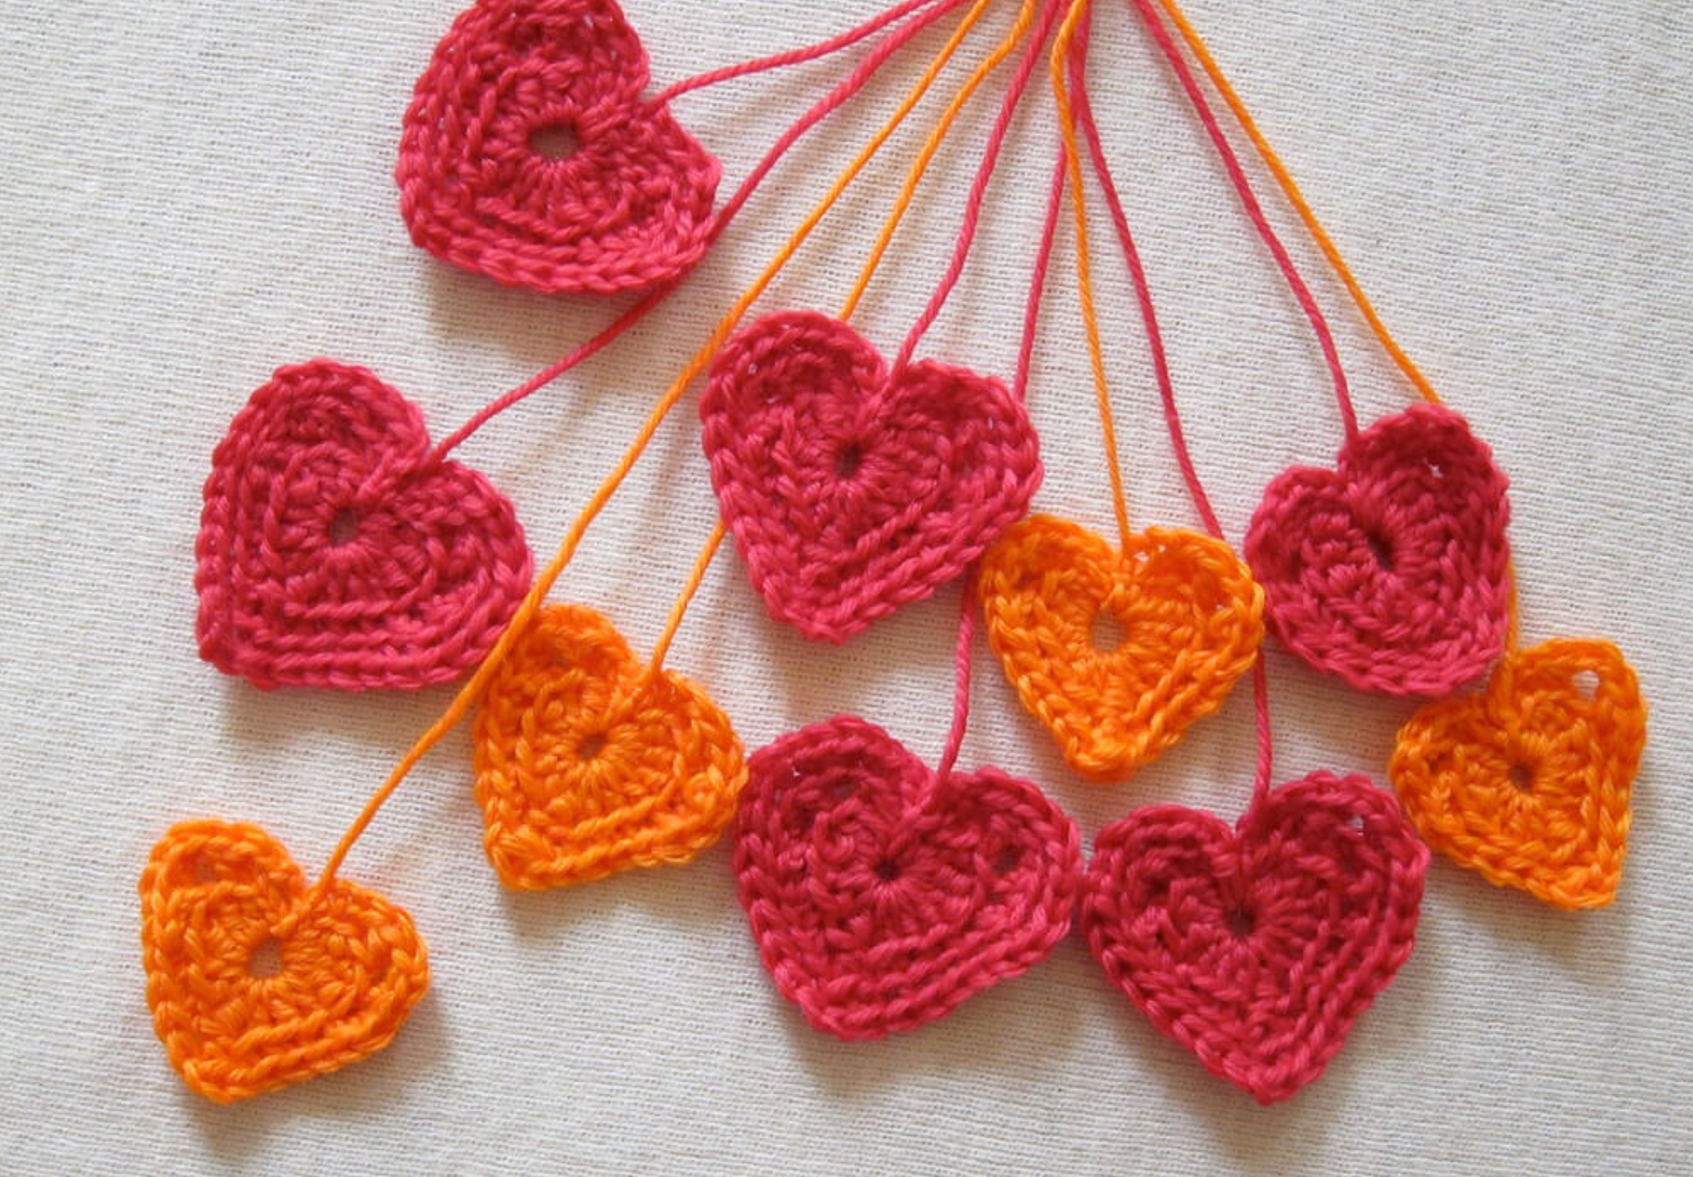 A bunch of knitted heart ornaments